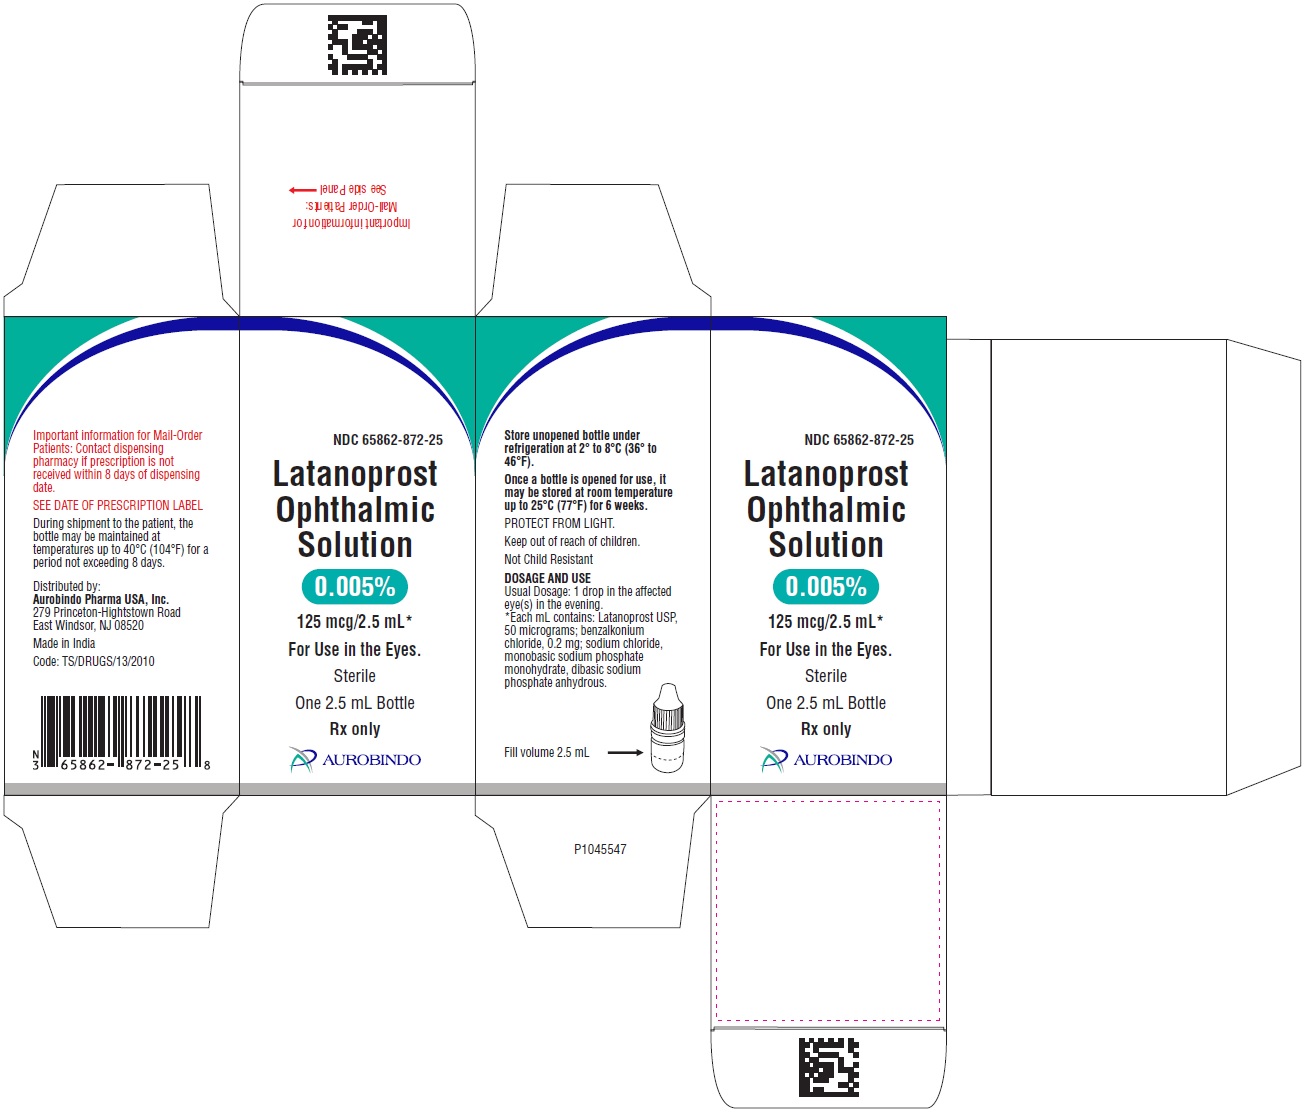 PACKAGE LABEL-PRINCIPAL DISPLAY PANEL - 0.005% (125 mcg/2.5 mL) - Container-Carton (1 Bottle)